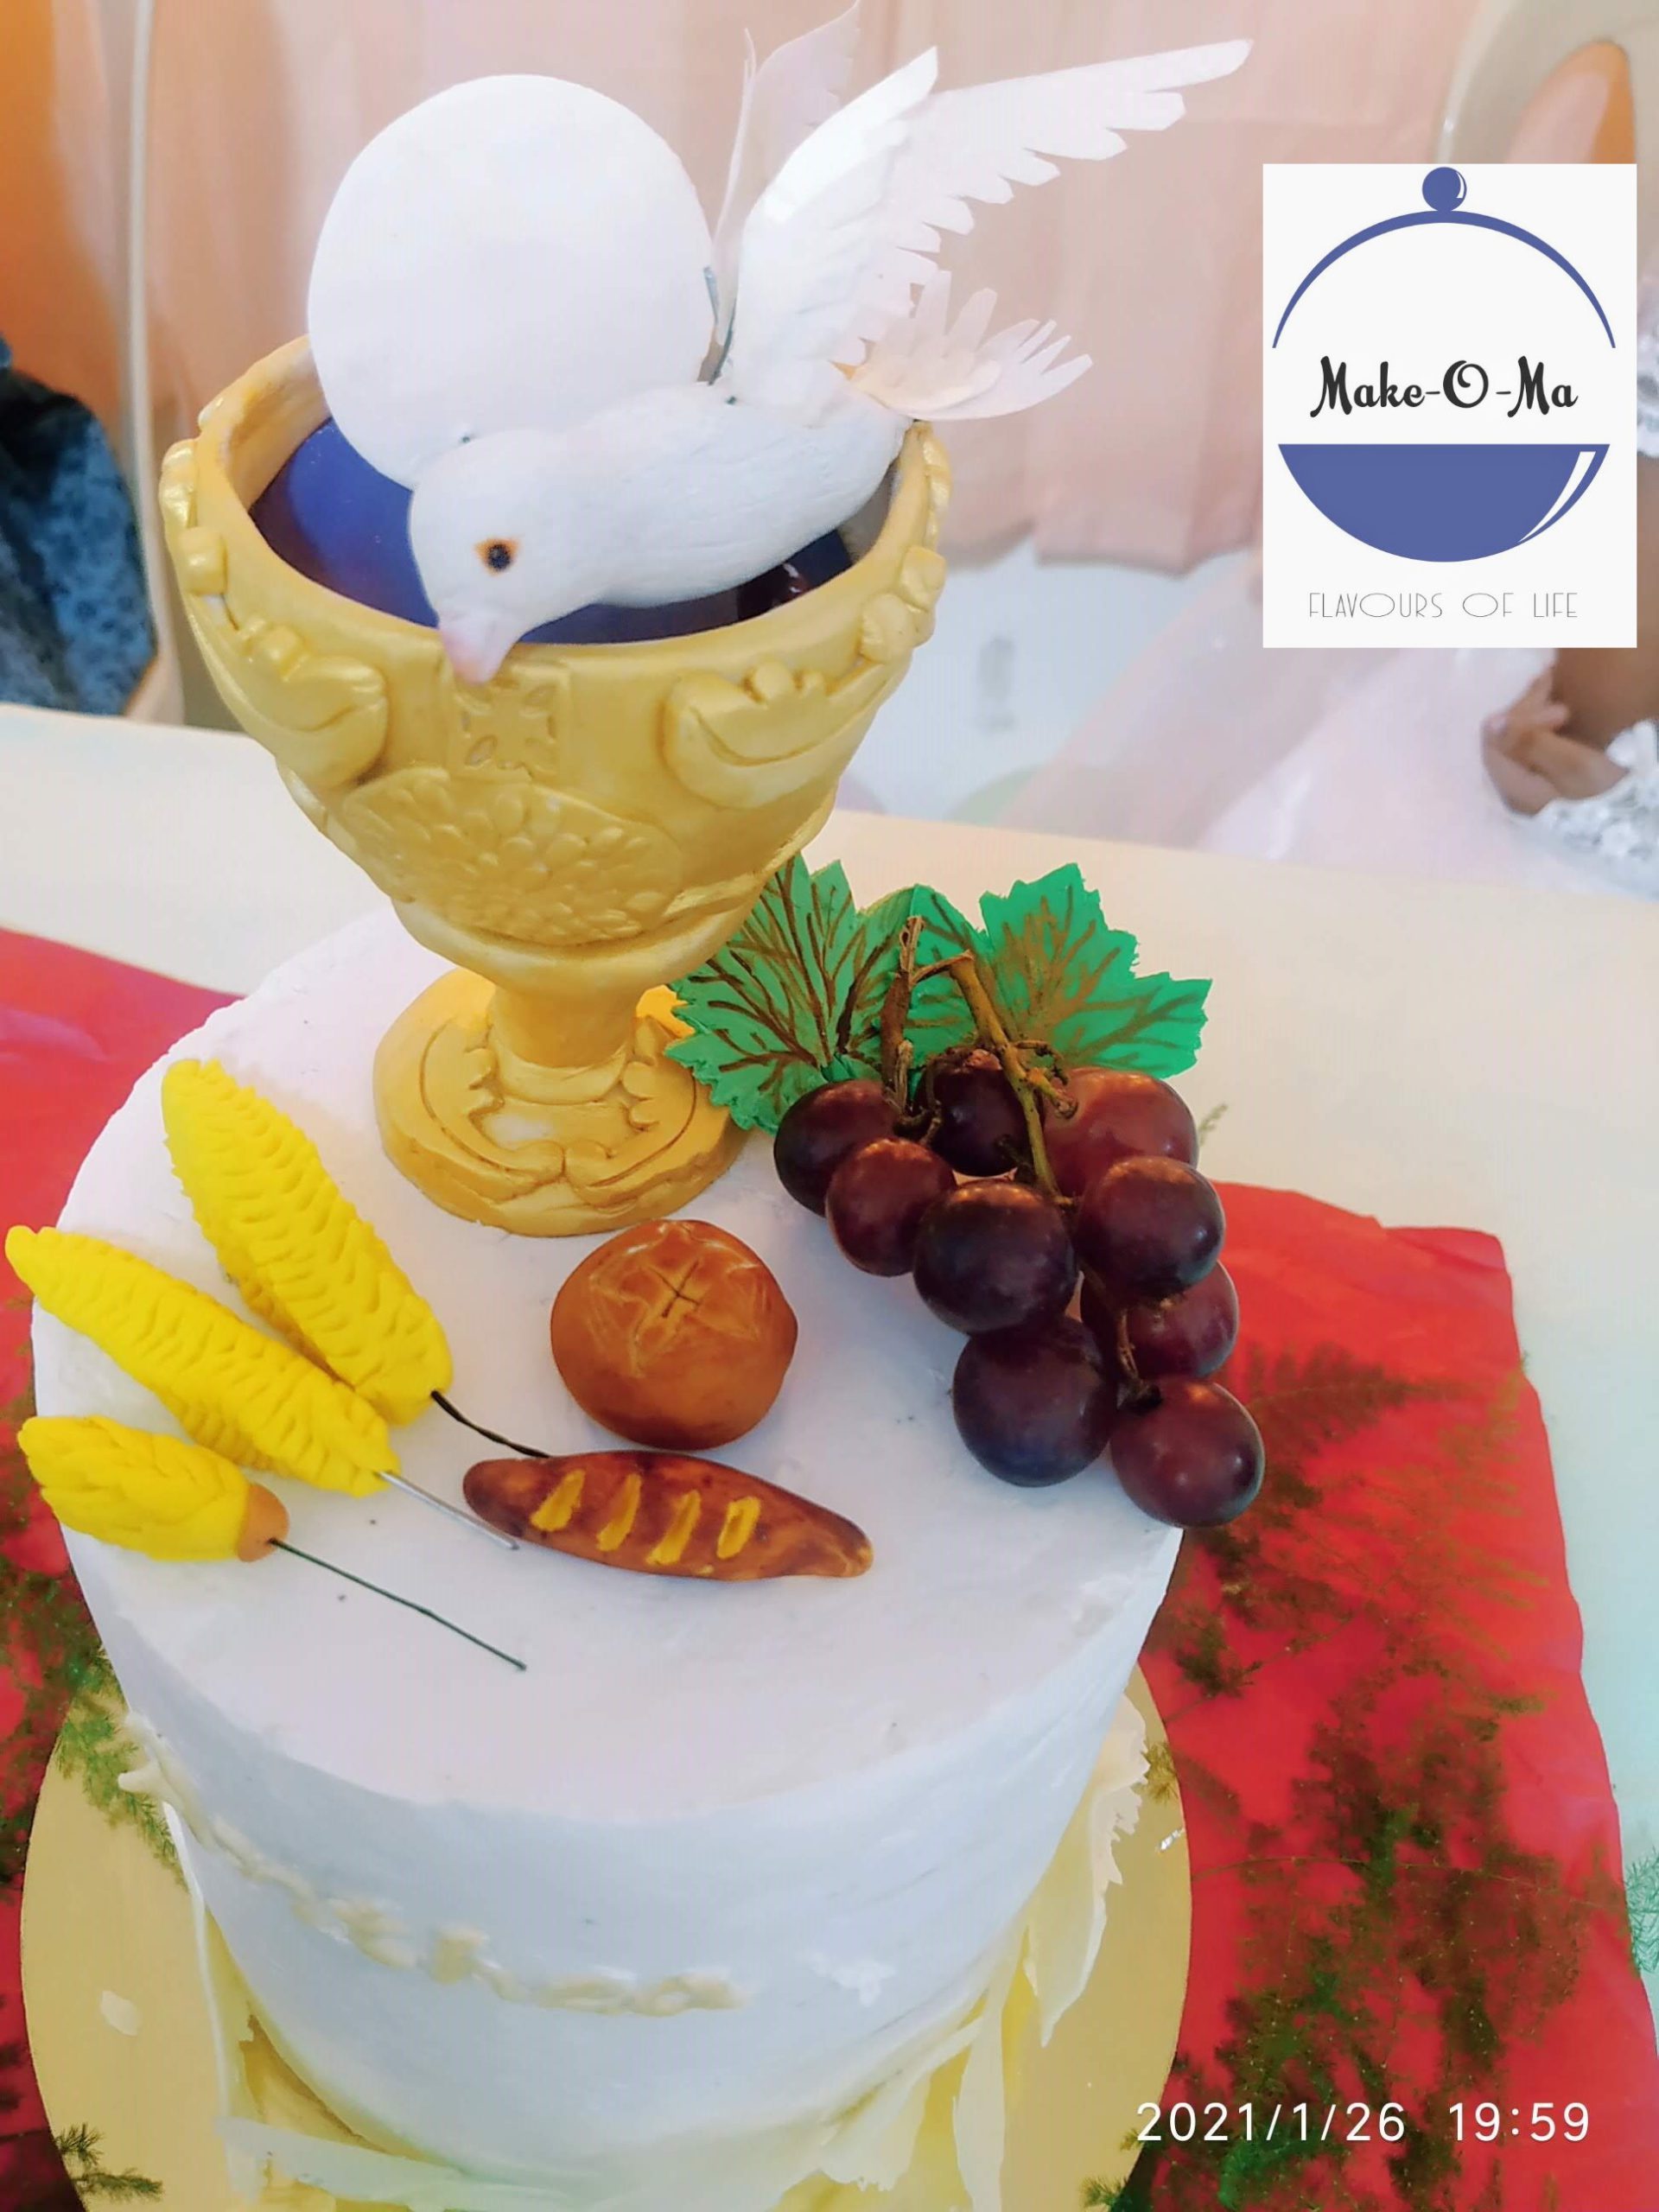 Double Barrel Holy Communion Cake Designs, Images, Price Near Me